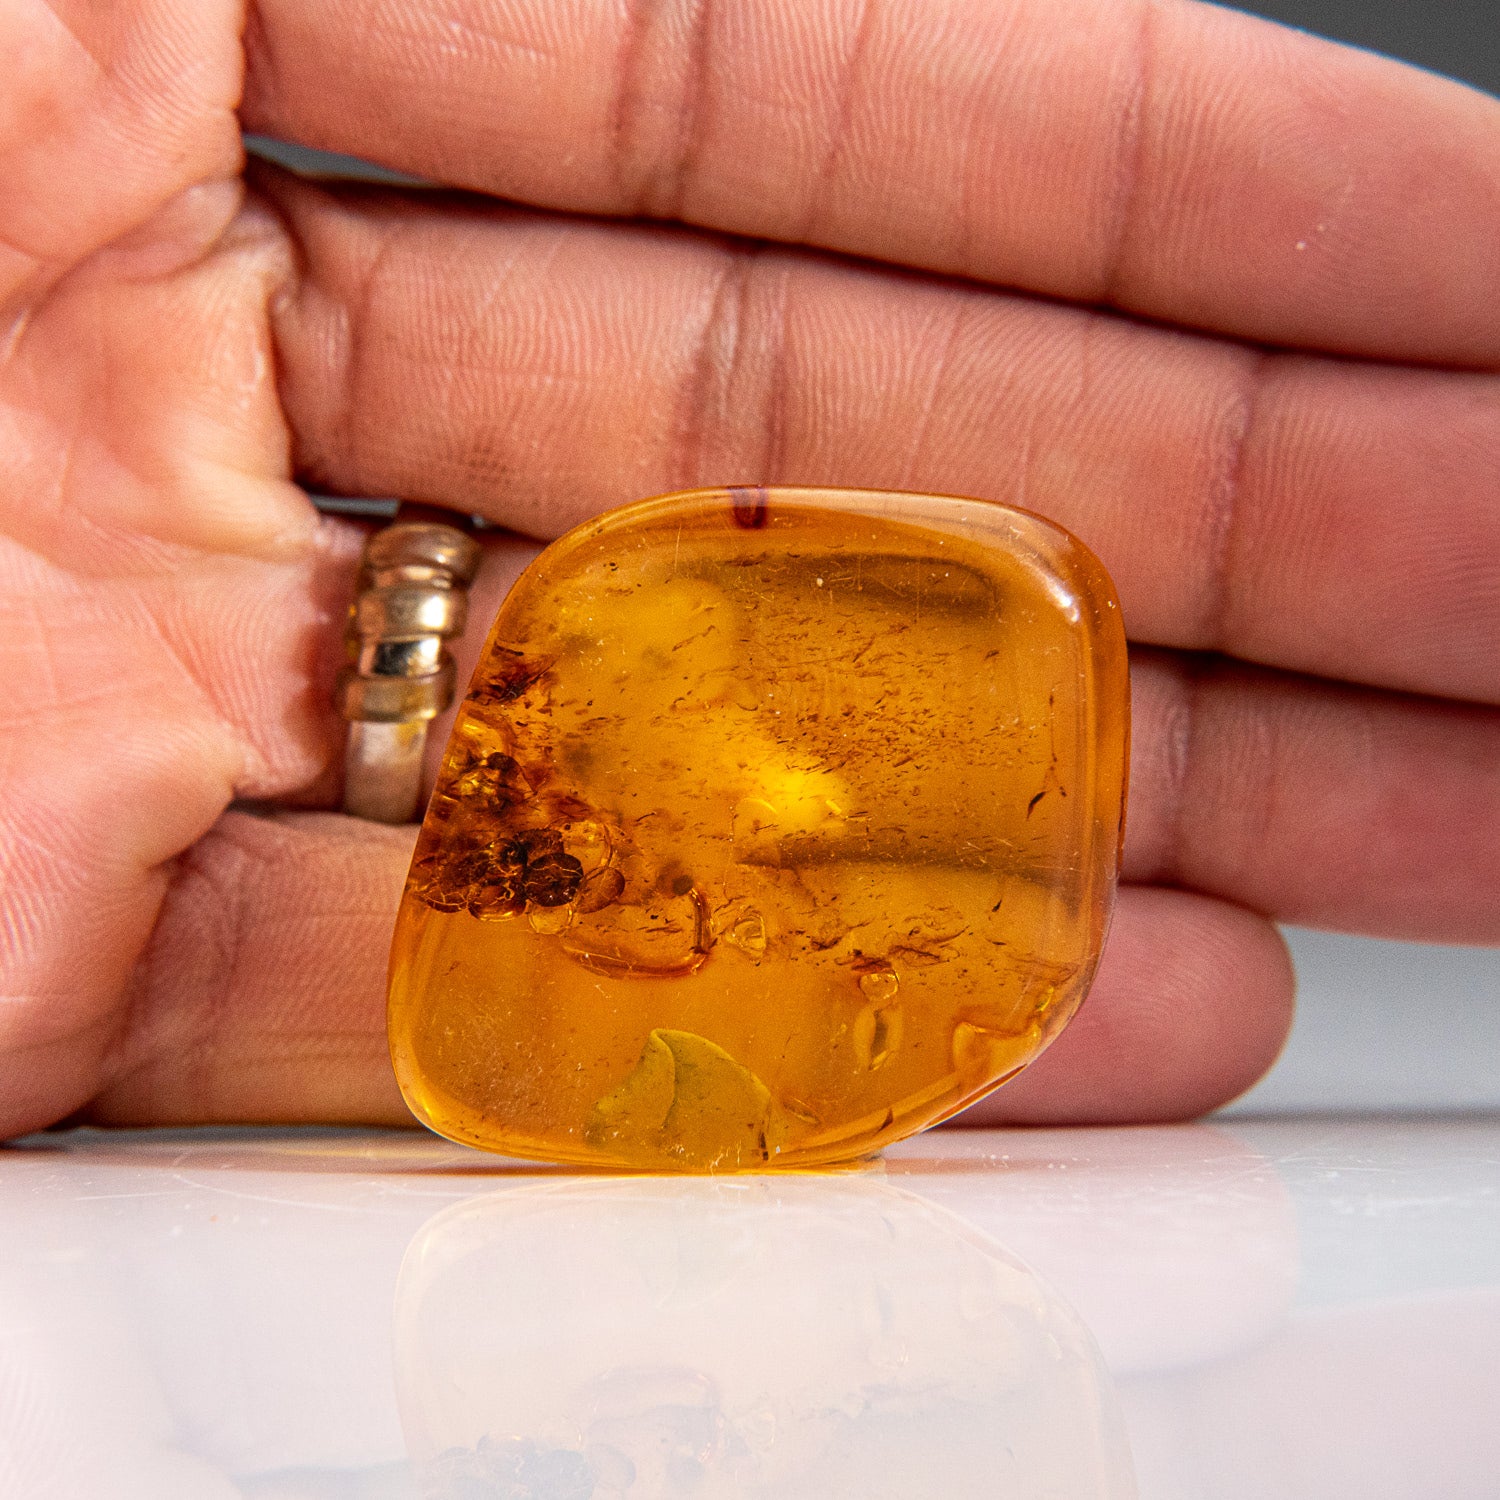 Genuine Gem-Quality Copal Amber from Colombia (10 grams)